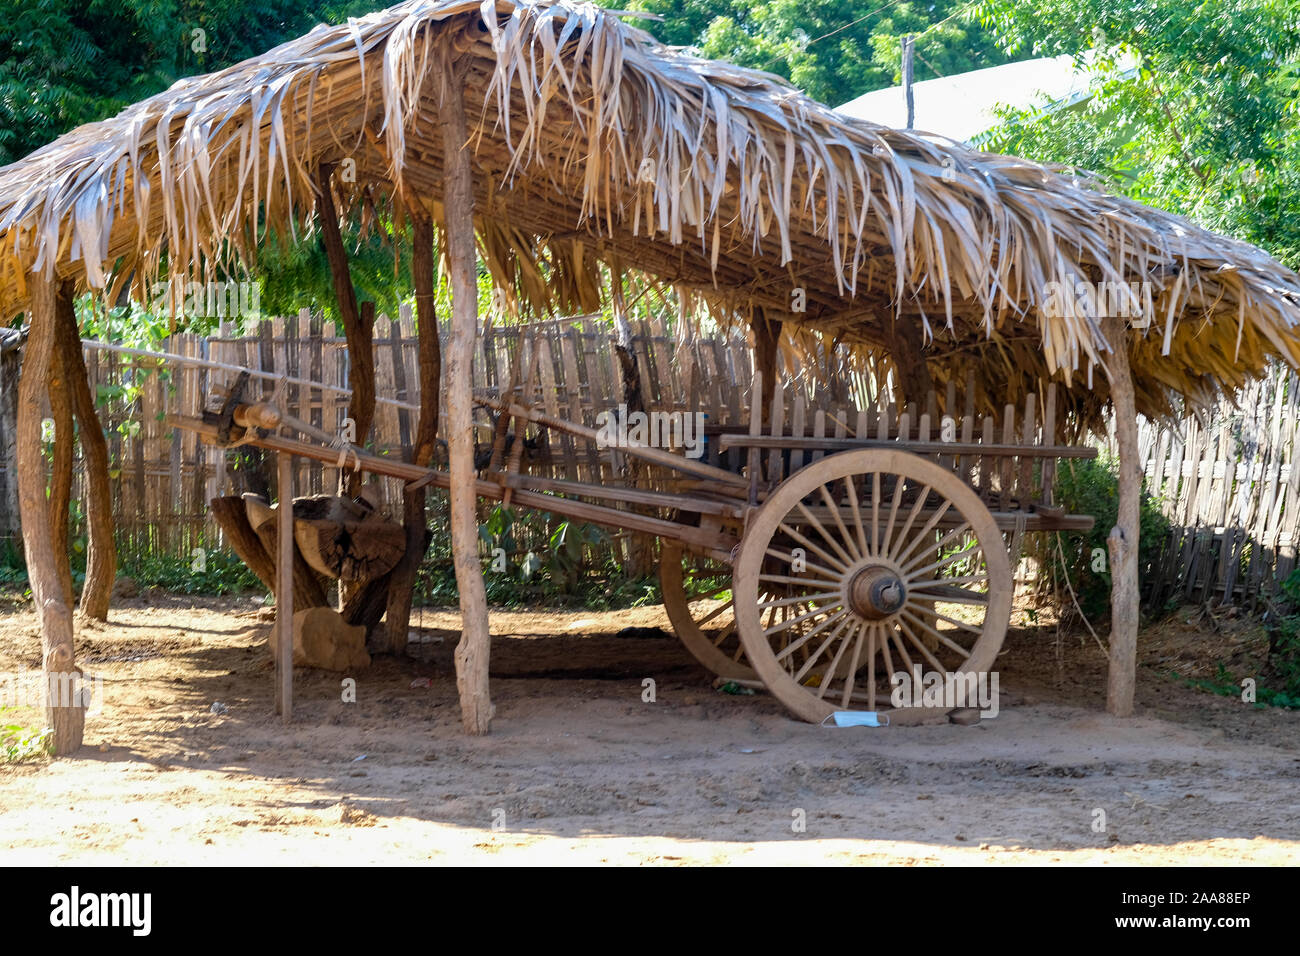 Traditional Burmese ox cart made of wood and protected from the the weather under a straw covered shed in a village outside Bagan, Myanmar (Burma) Stock Photo